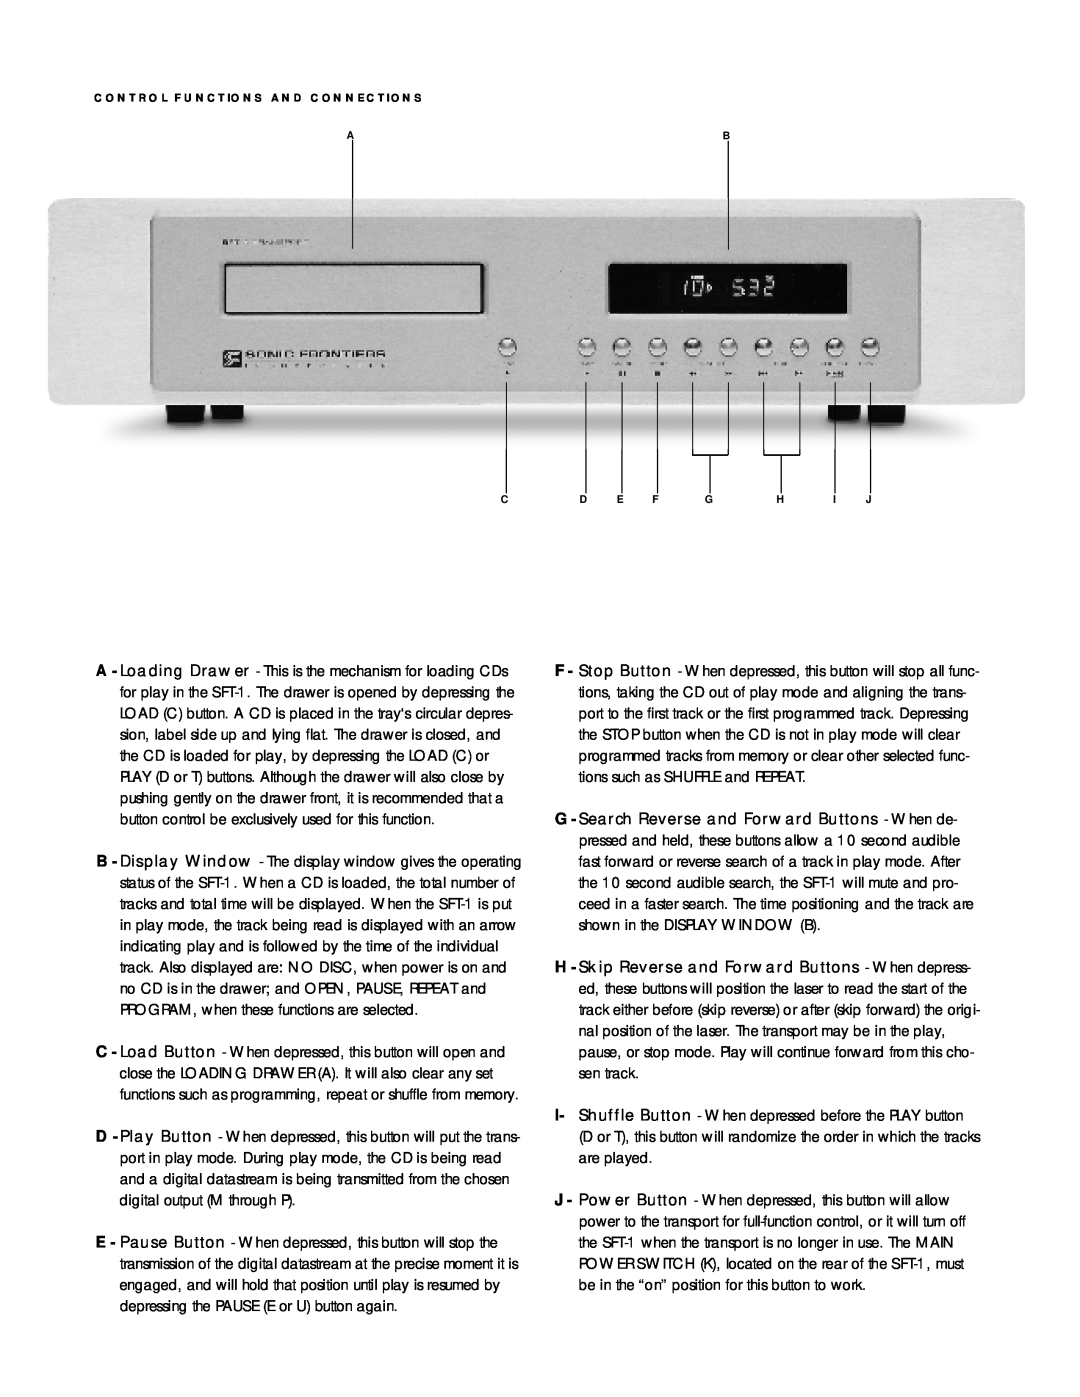 Sonic Impact Technologies SFT-1 owner manual P R O G R A M, when these functions are selected 